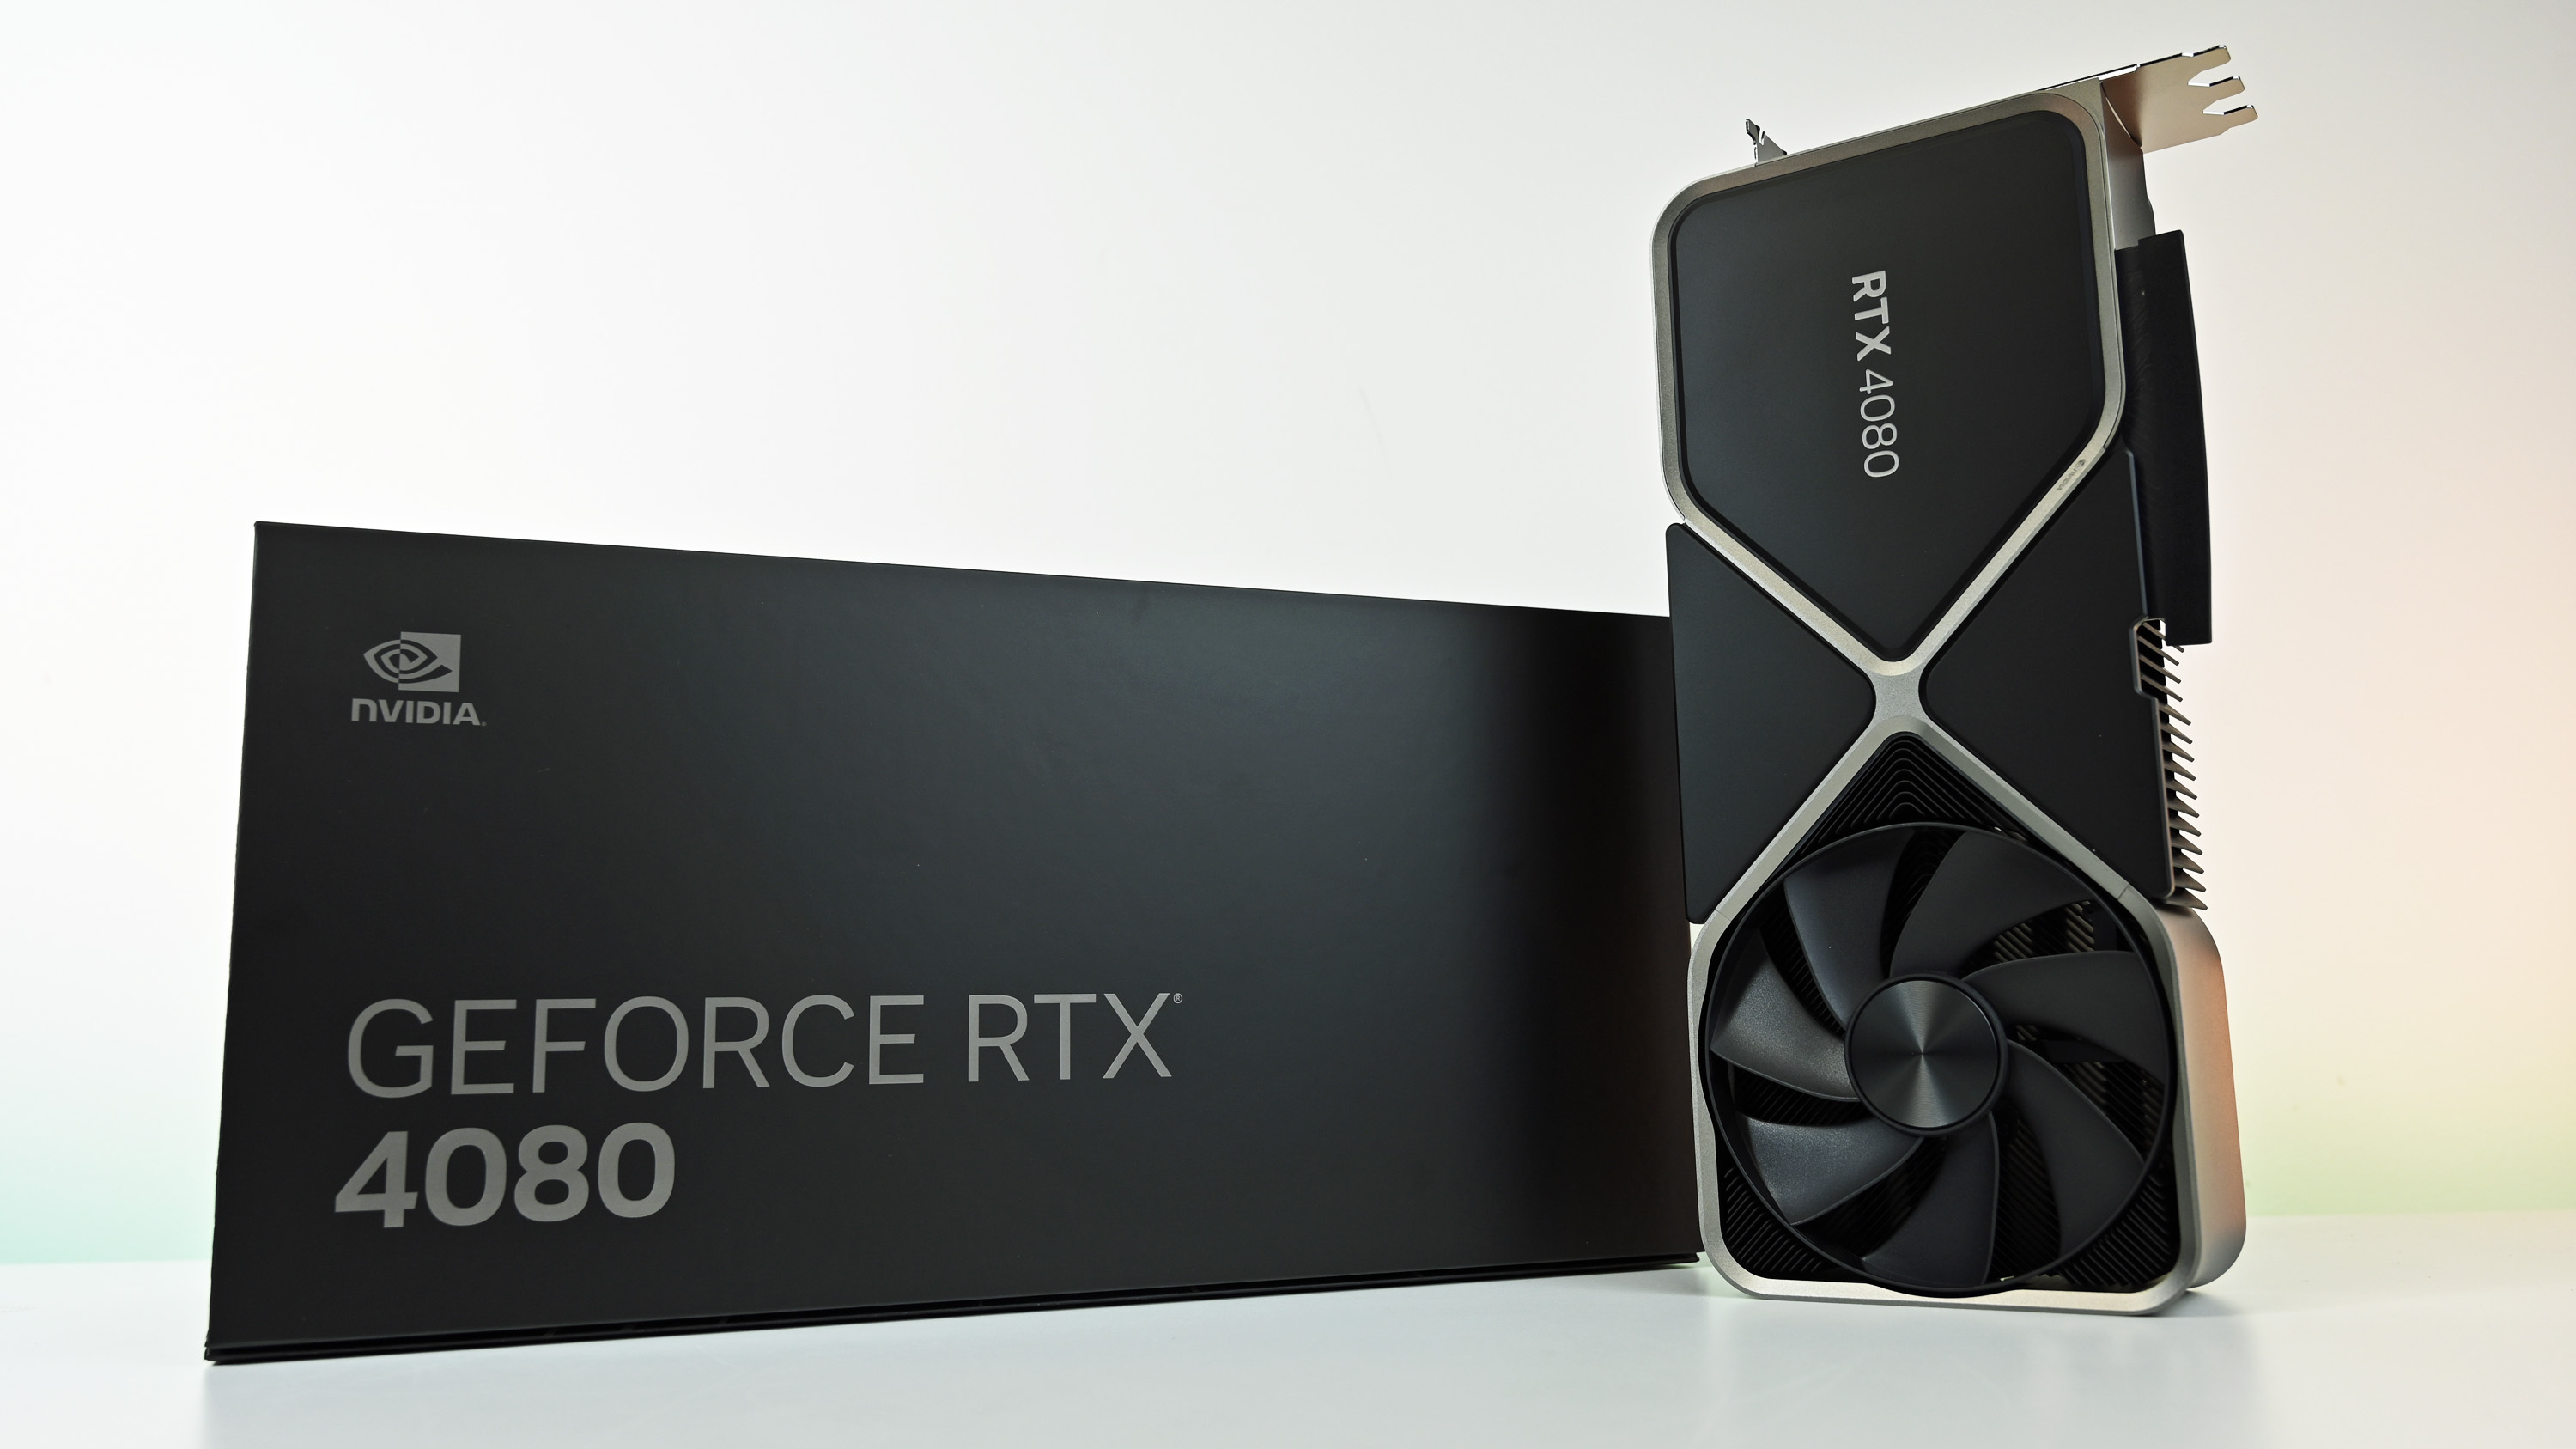 The RTX 4080 Founder's Edition